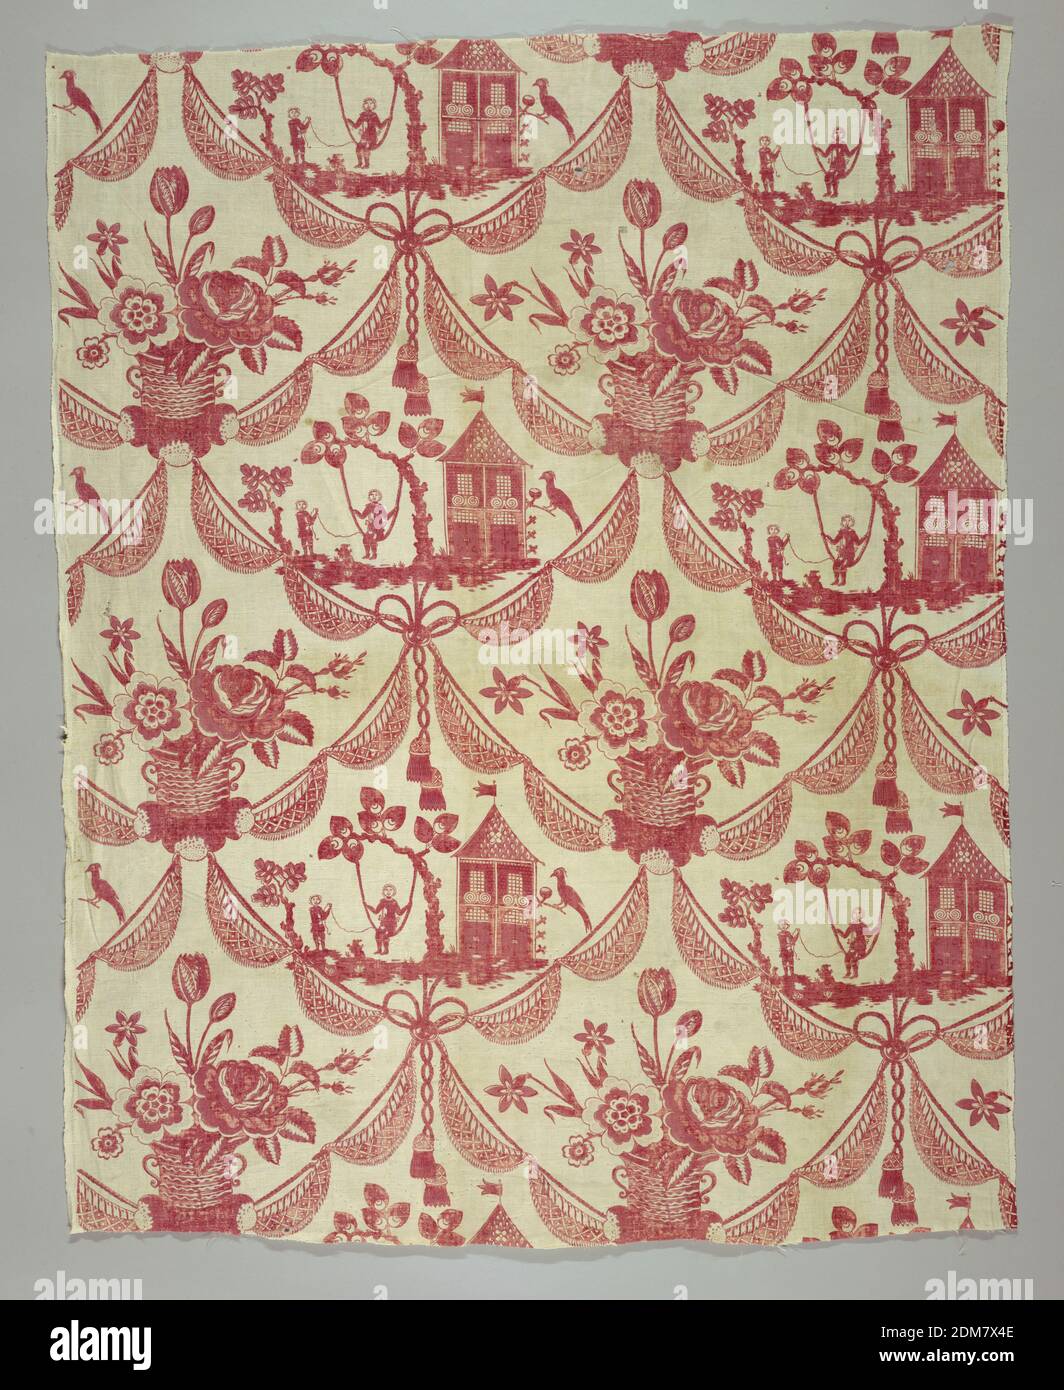 Textile, Medium: cotton Technique: block printed on plain weave, Lozenges formed by drapery containing person in a swing in front of a house alternate with a vase of flowers. In two reds on white., France, late 18th century, printed, dyed & painted textiles, Textile Stock Photo